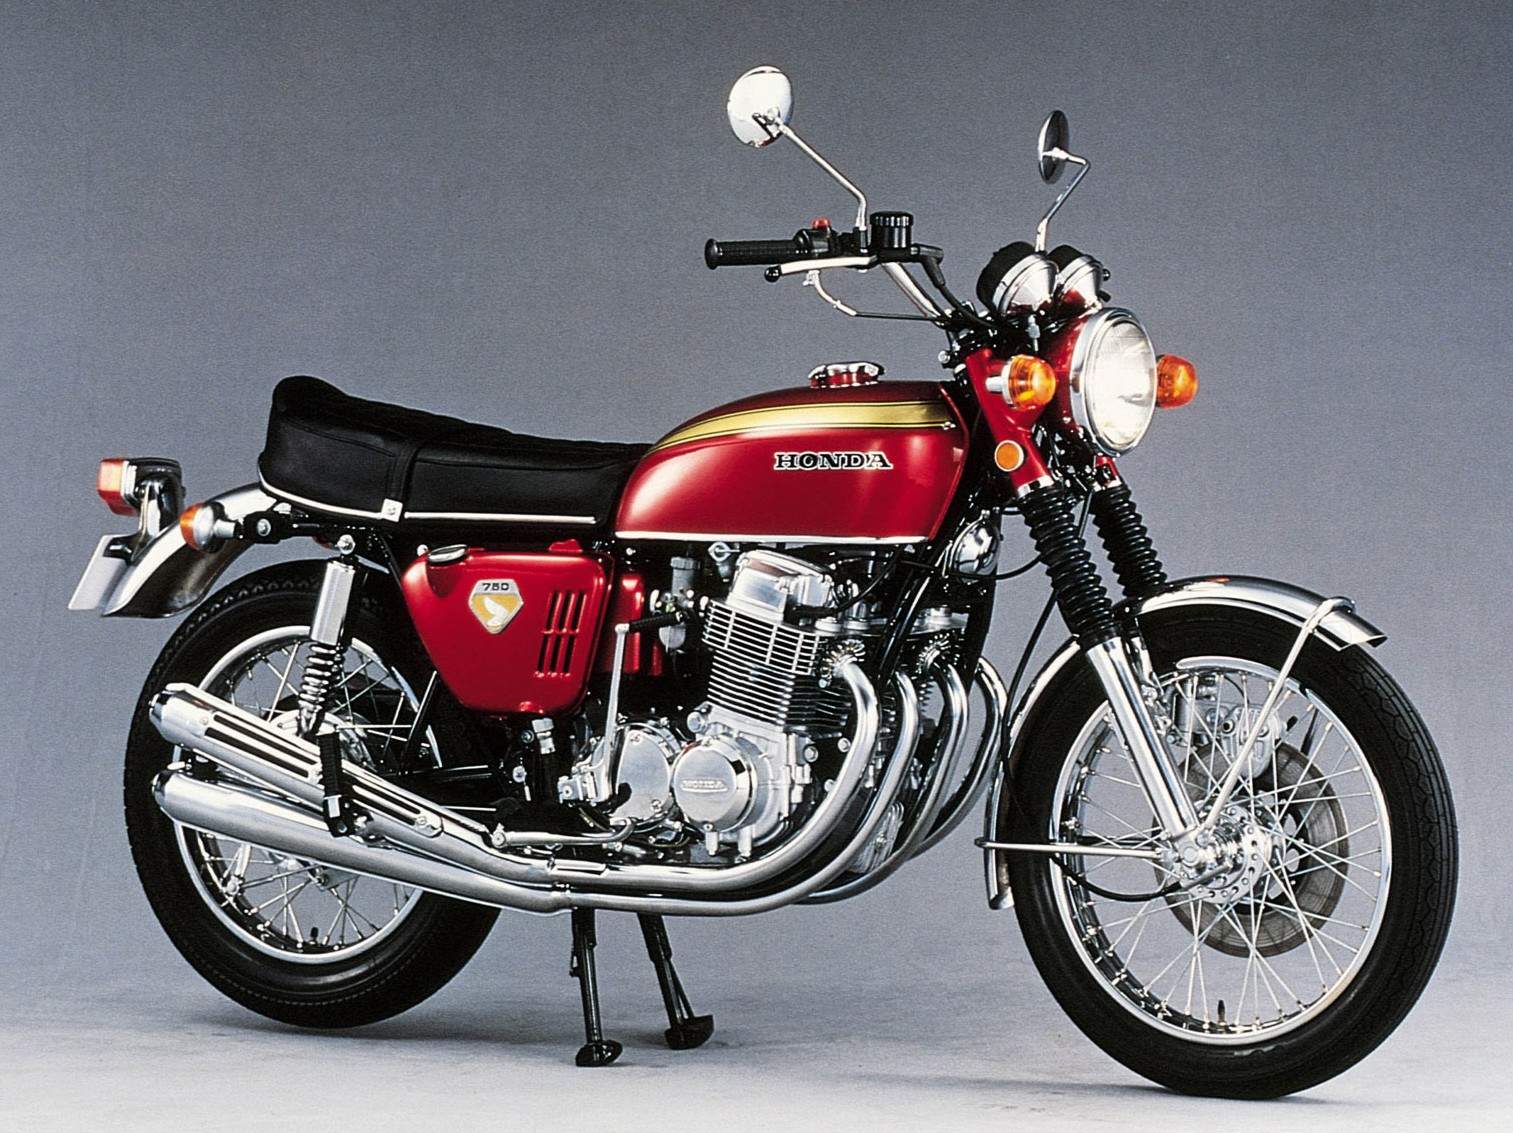 The Honda CB 750: An Ideal Classic Bike for Collecting